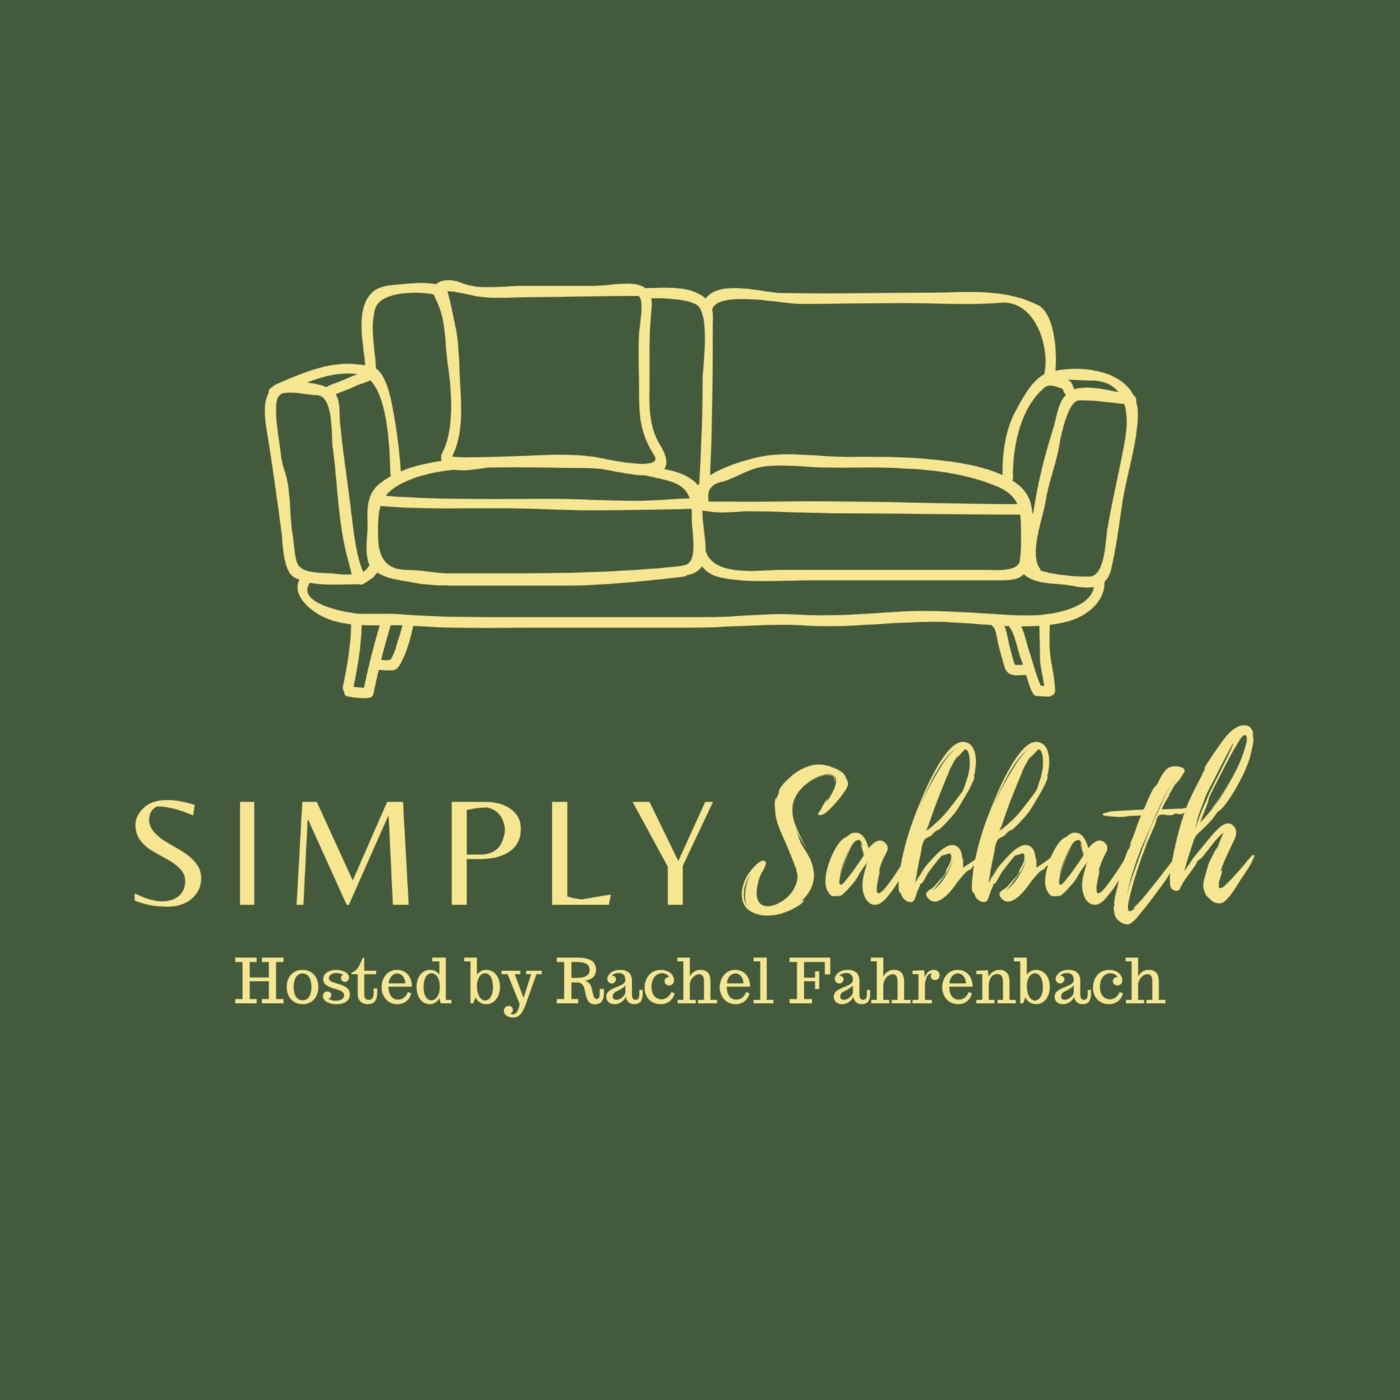 Ep 31: 5 Tips for Reconnecting as a Family during Sabbath